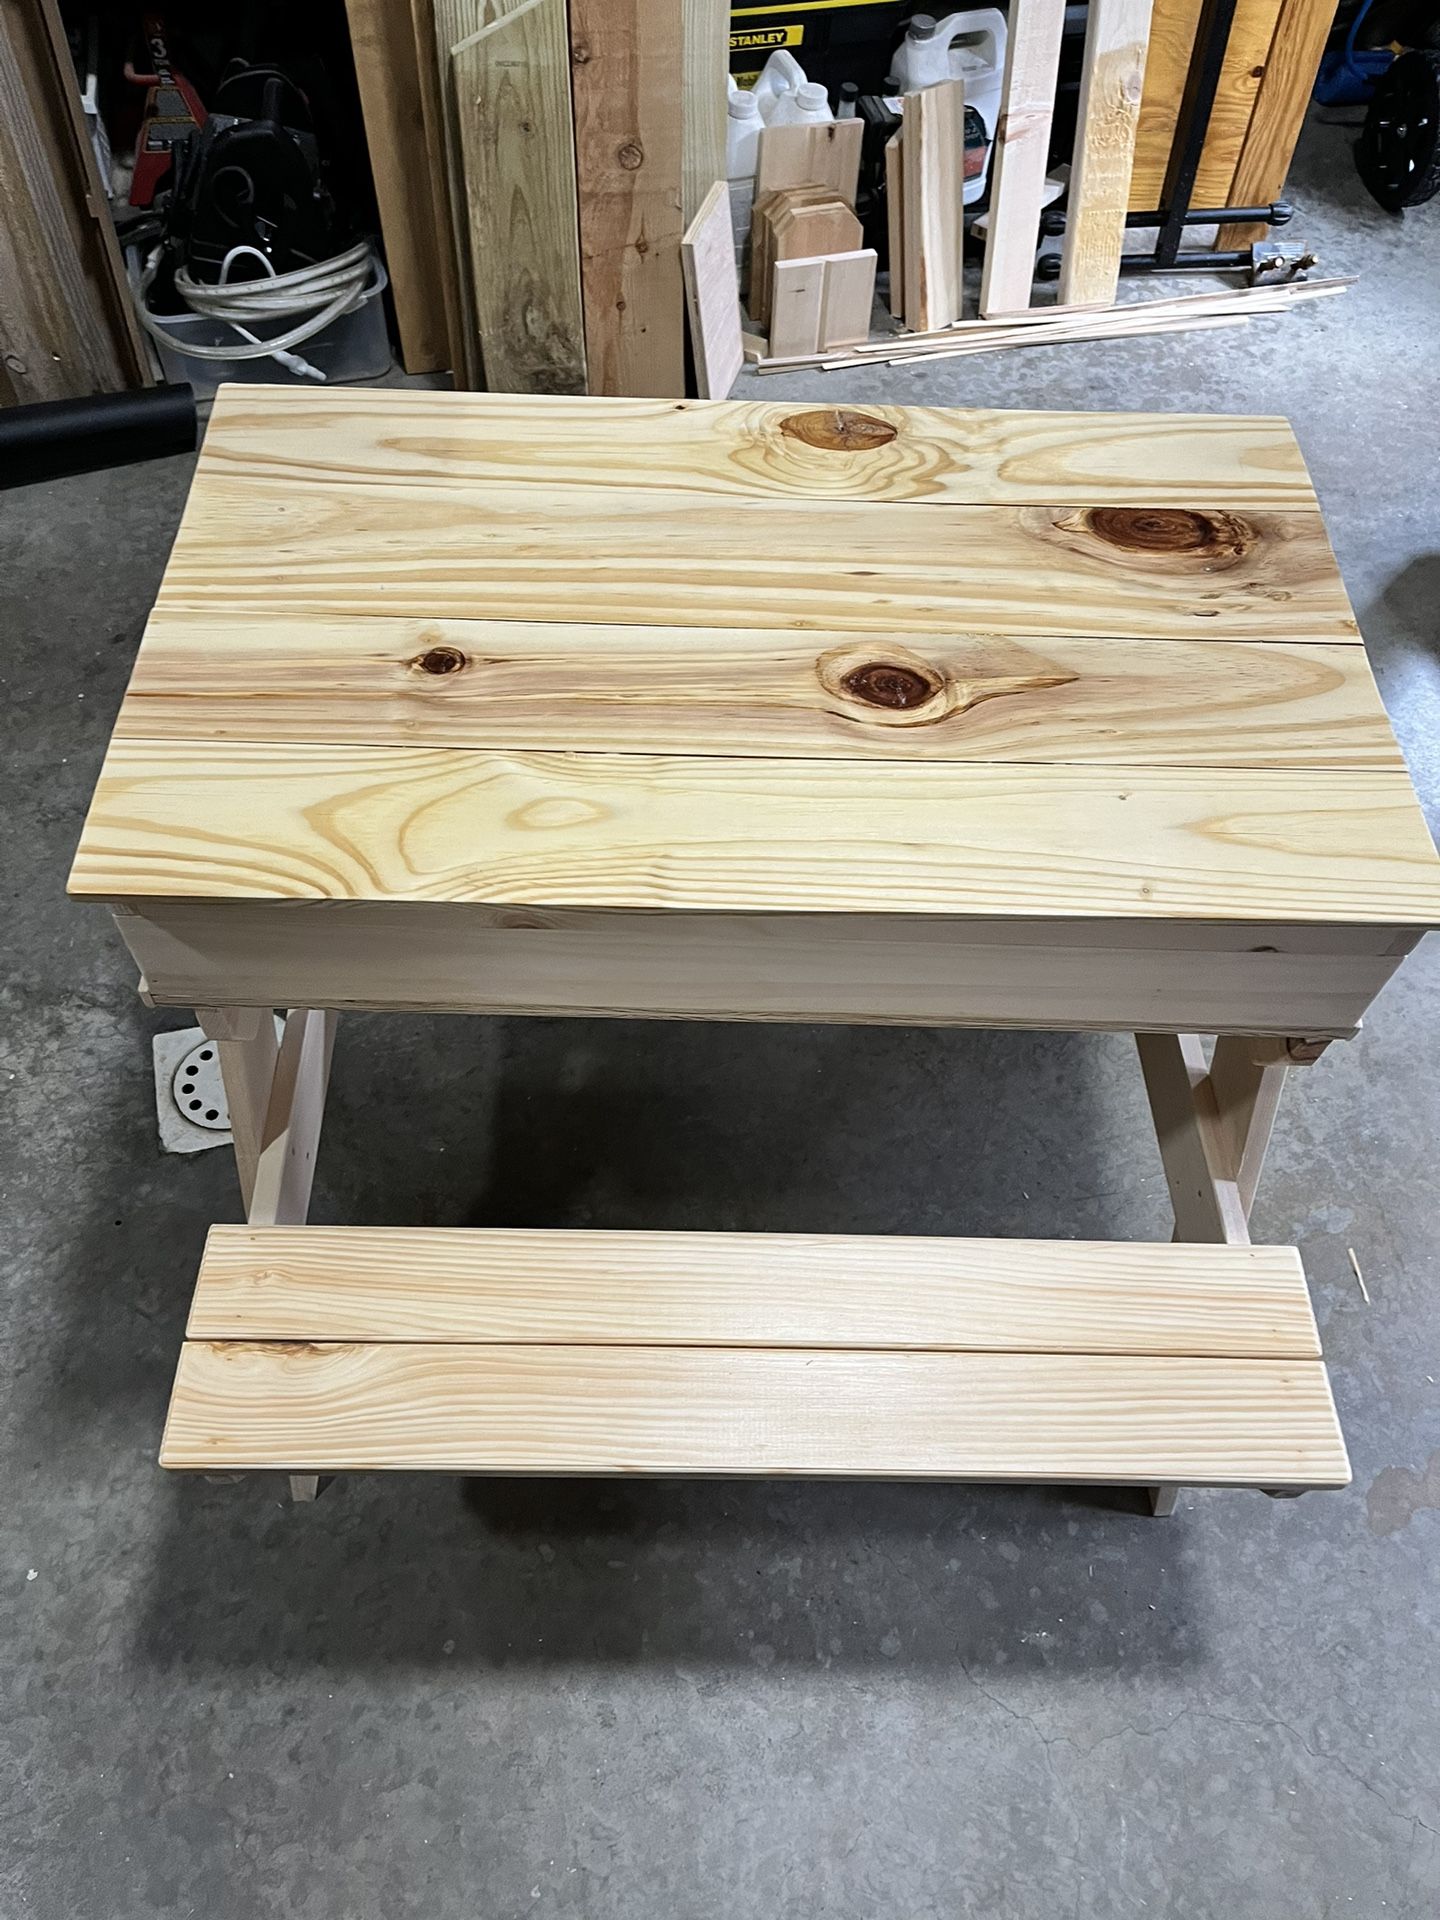 Handcrafted Children’s Picnic/Sand Box Picnic Table